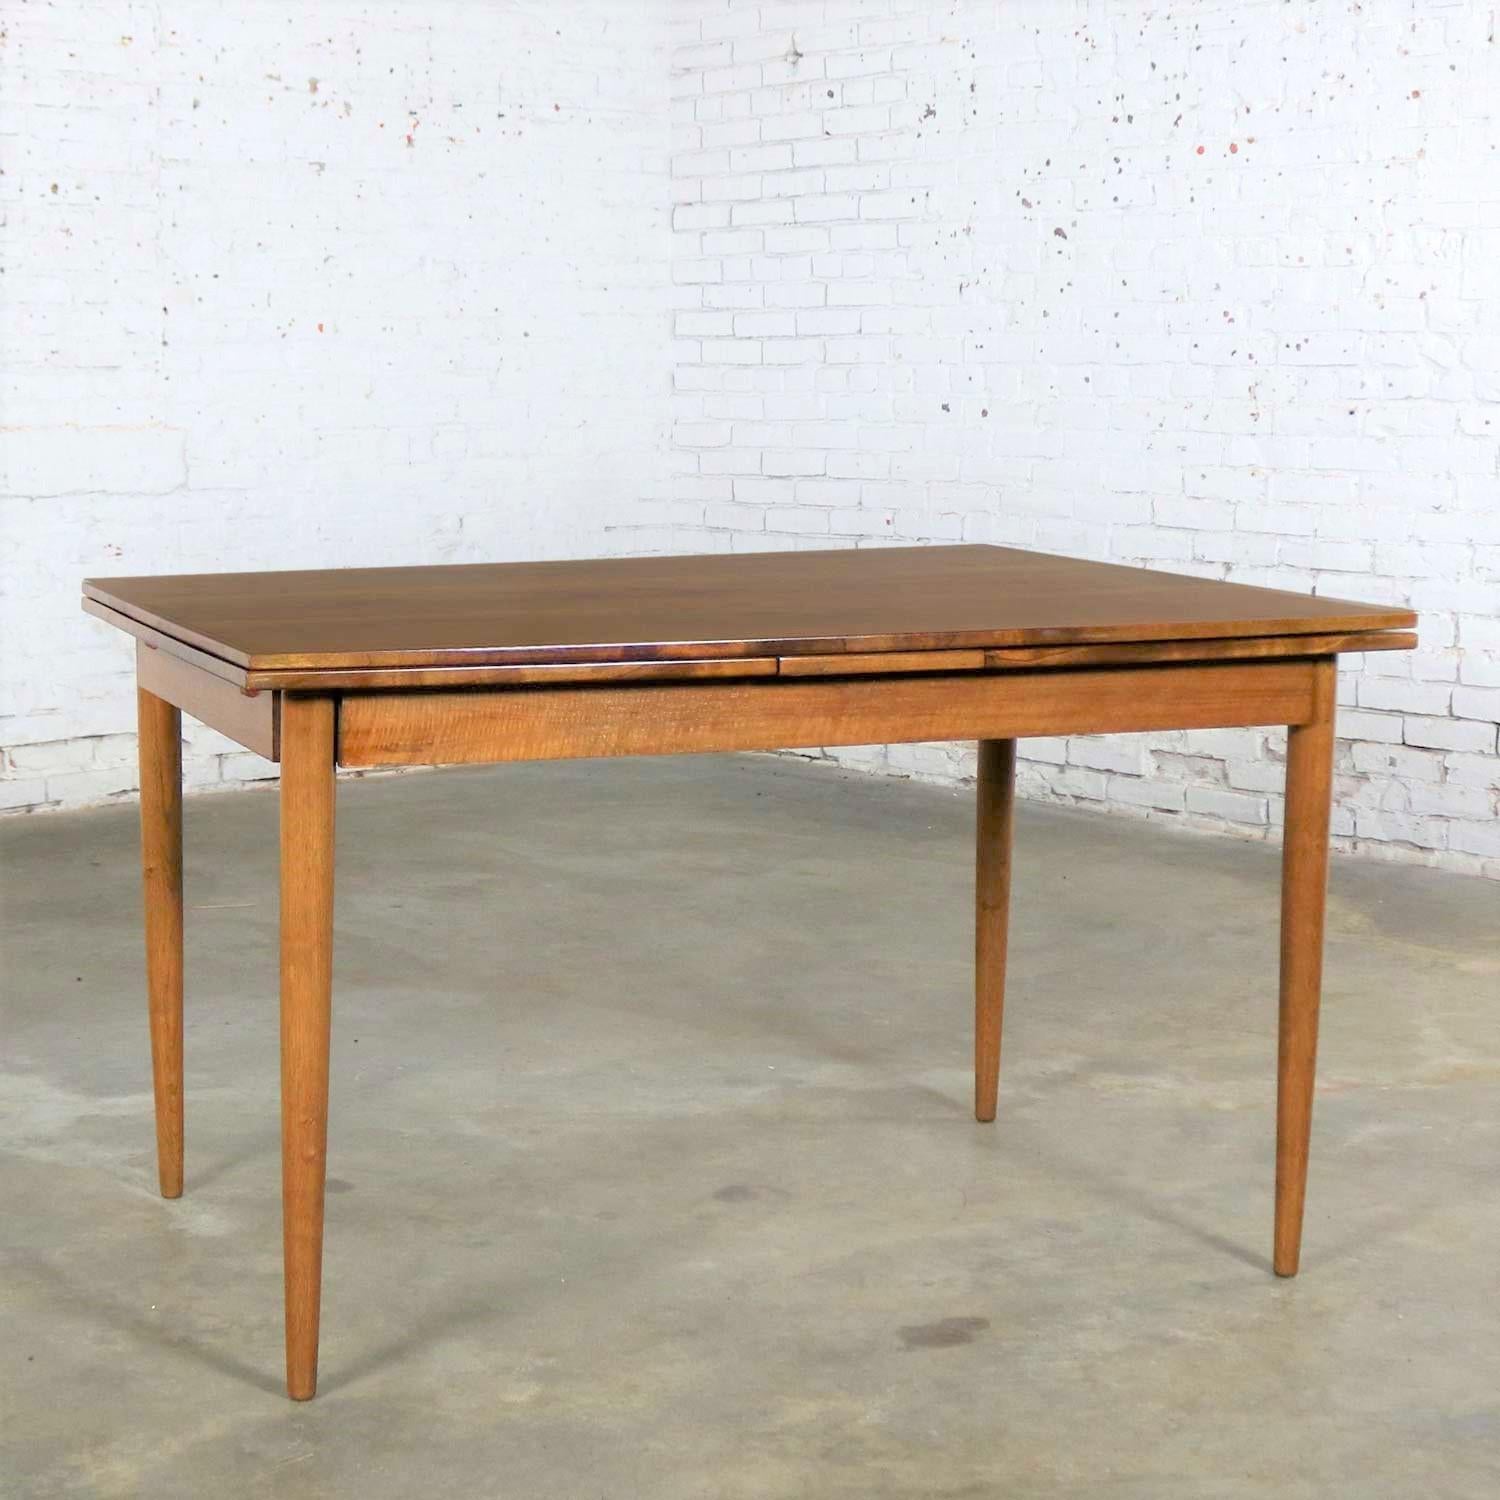 20th Century Mid-Century Modern Draw Leaf Extending Dining Table After Conant Ball